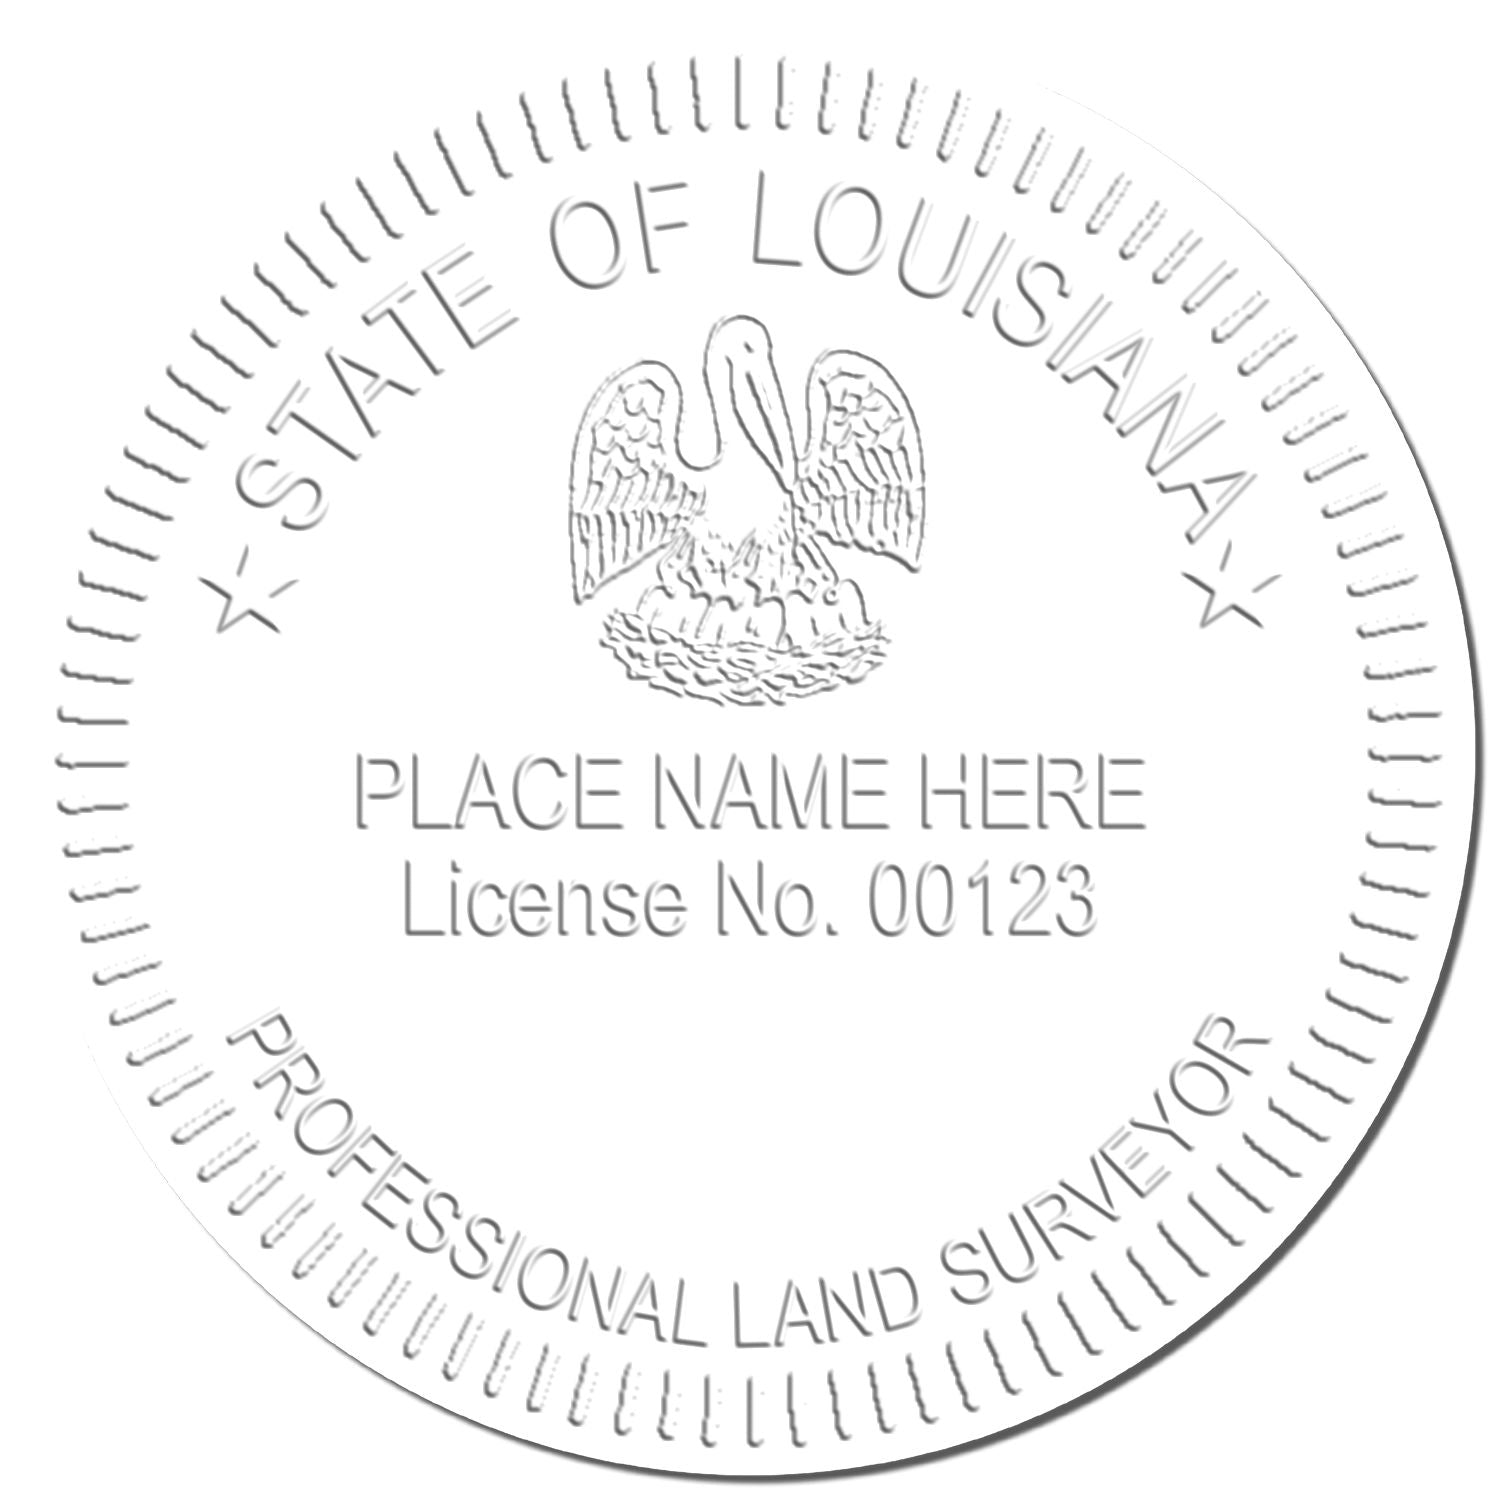 This paper is stamped with a sample imprint of the Handheld Louisiana Land Surveyor Seal, signifying its quality and reliability.